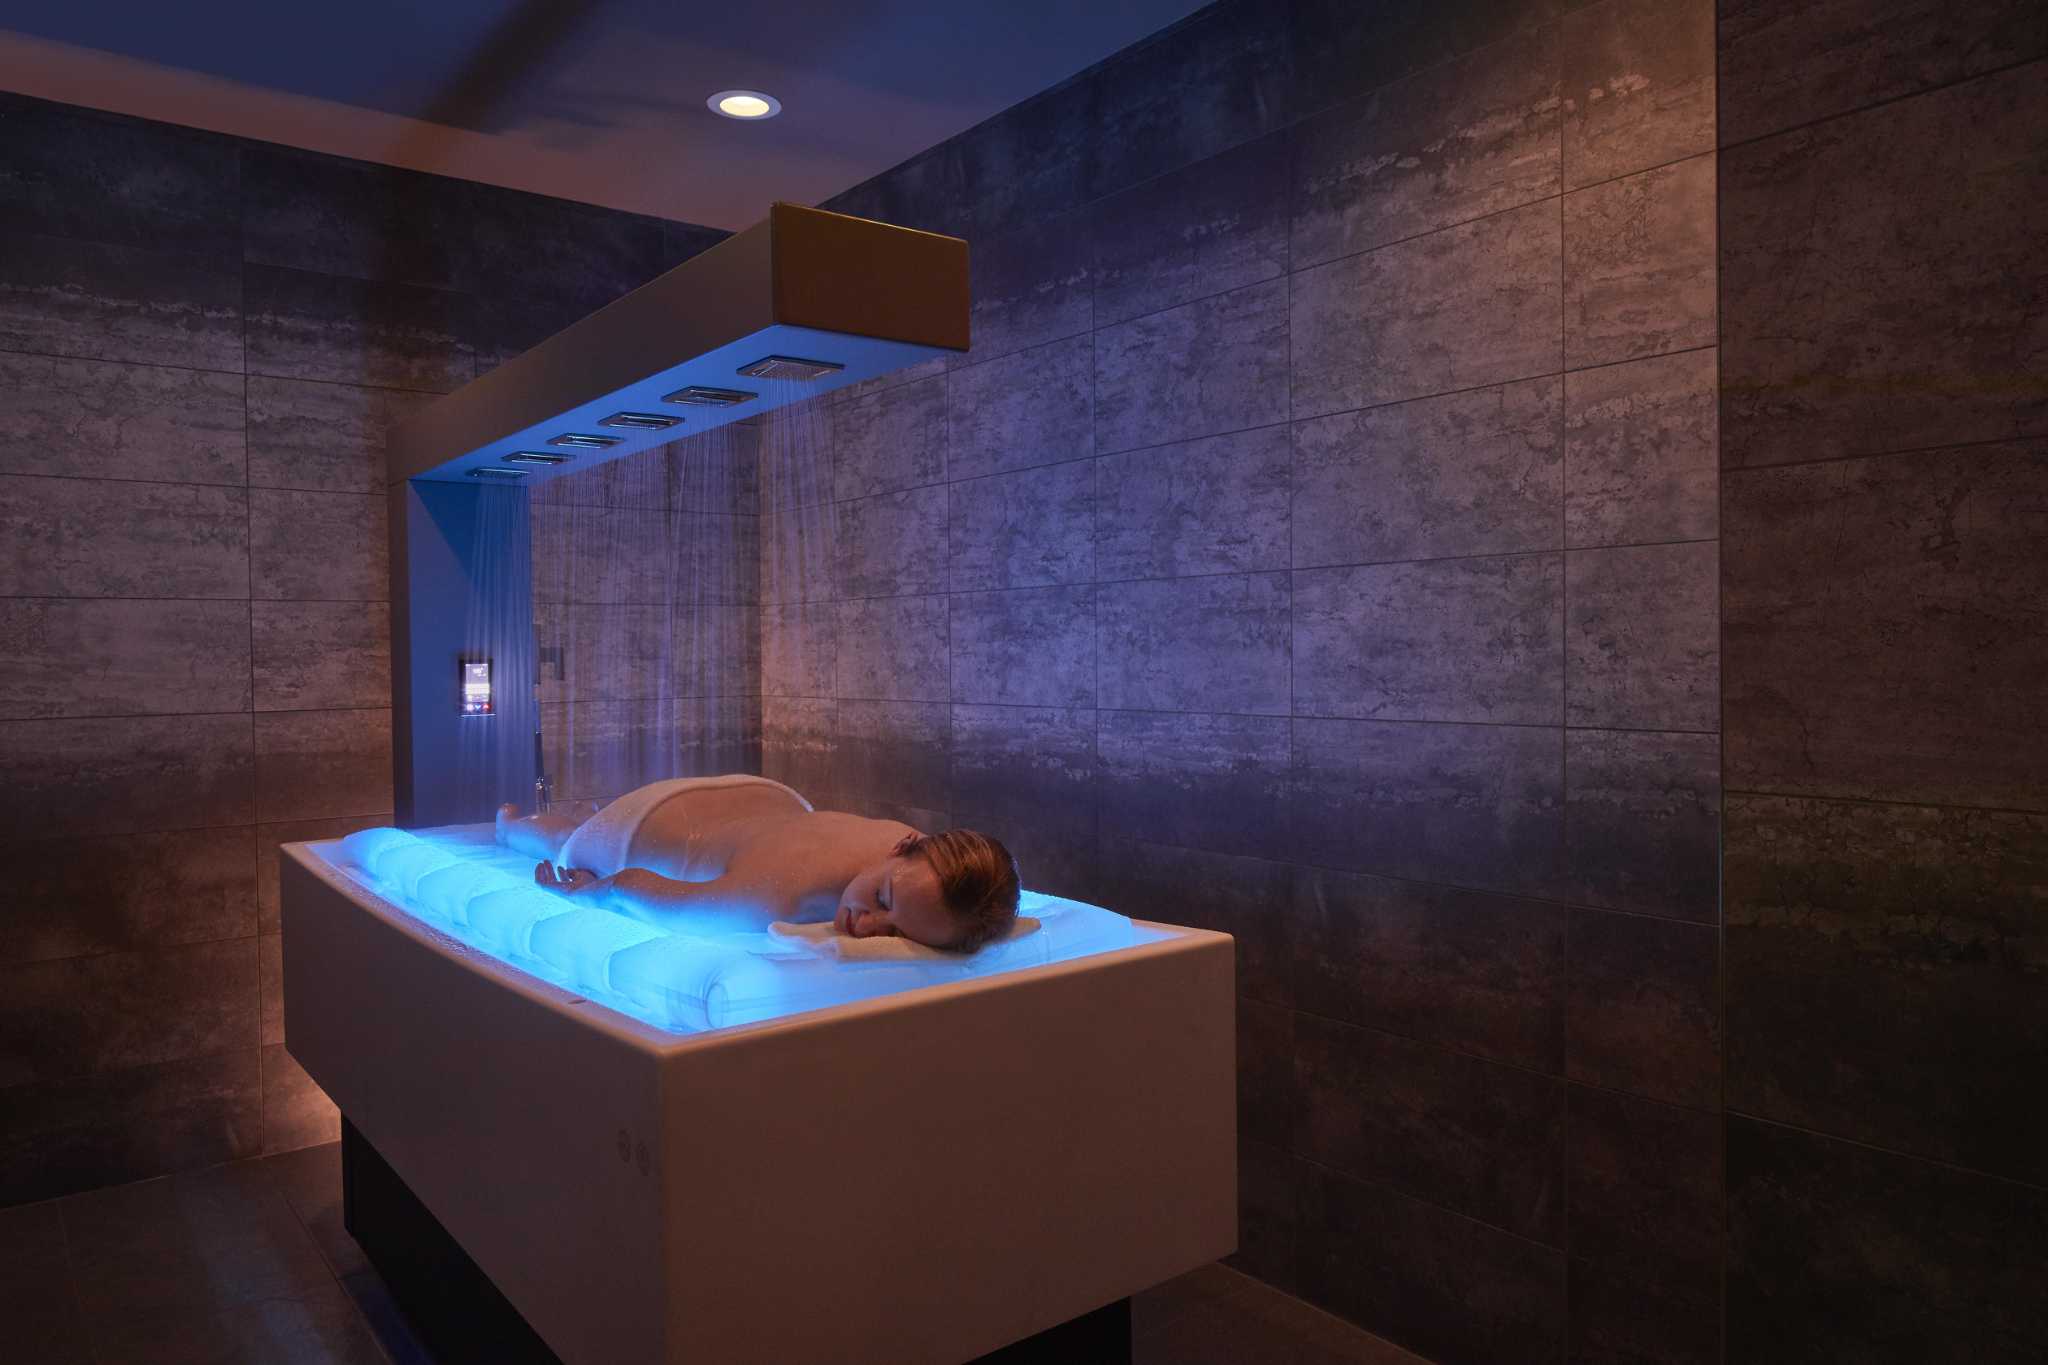 Four overthetop beauty treatments to try at Houston spas this spring